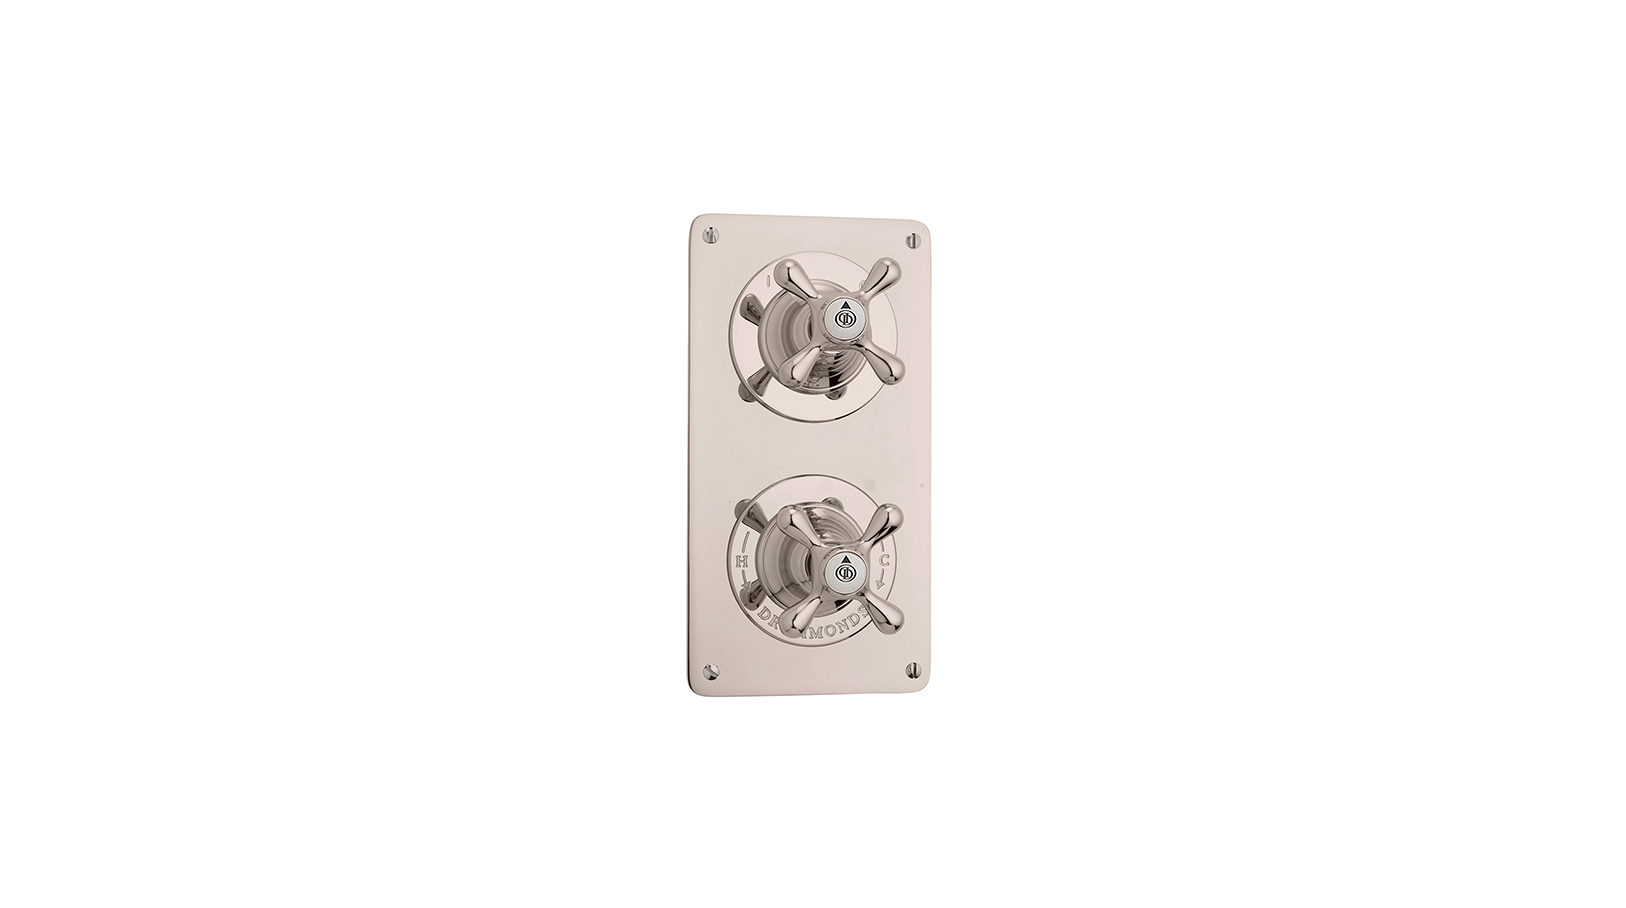 The Mull Classic Shower Plate Thermo & On/Off